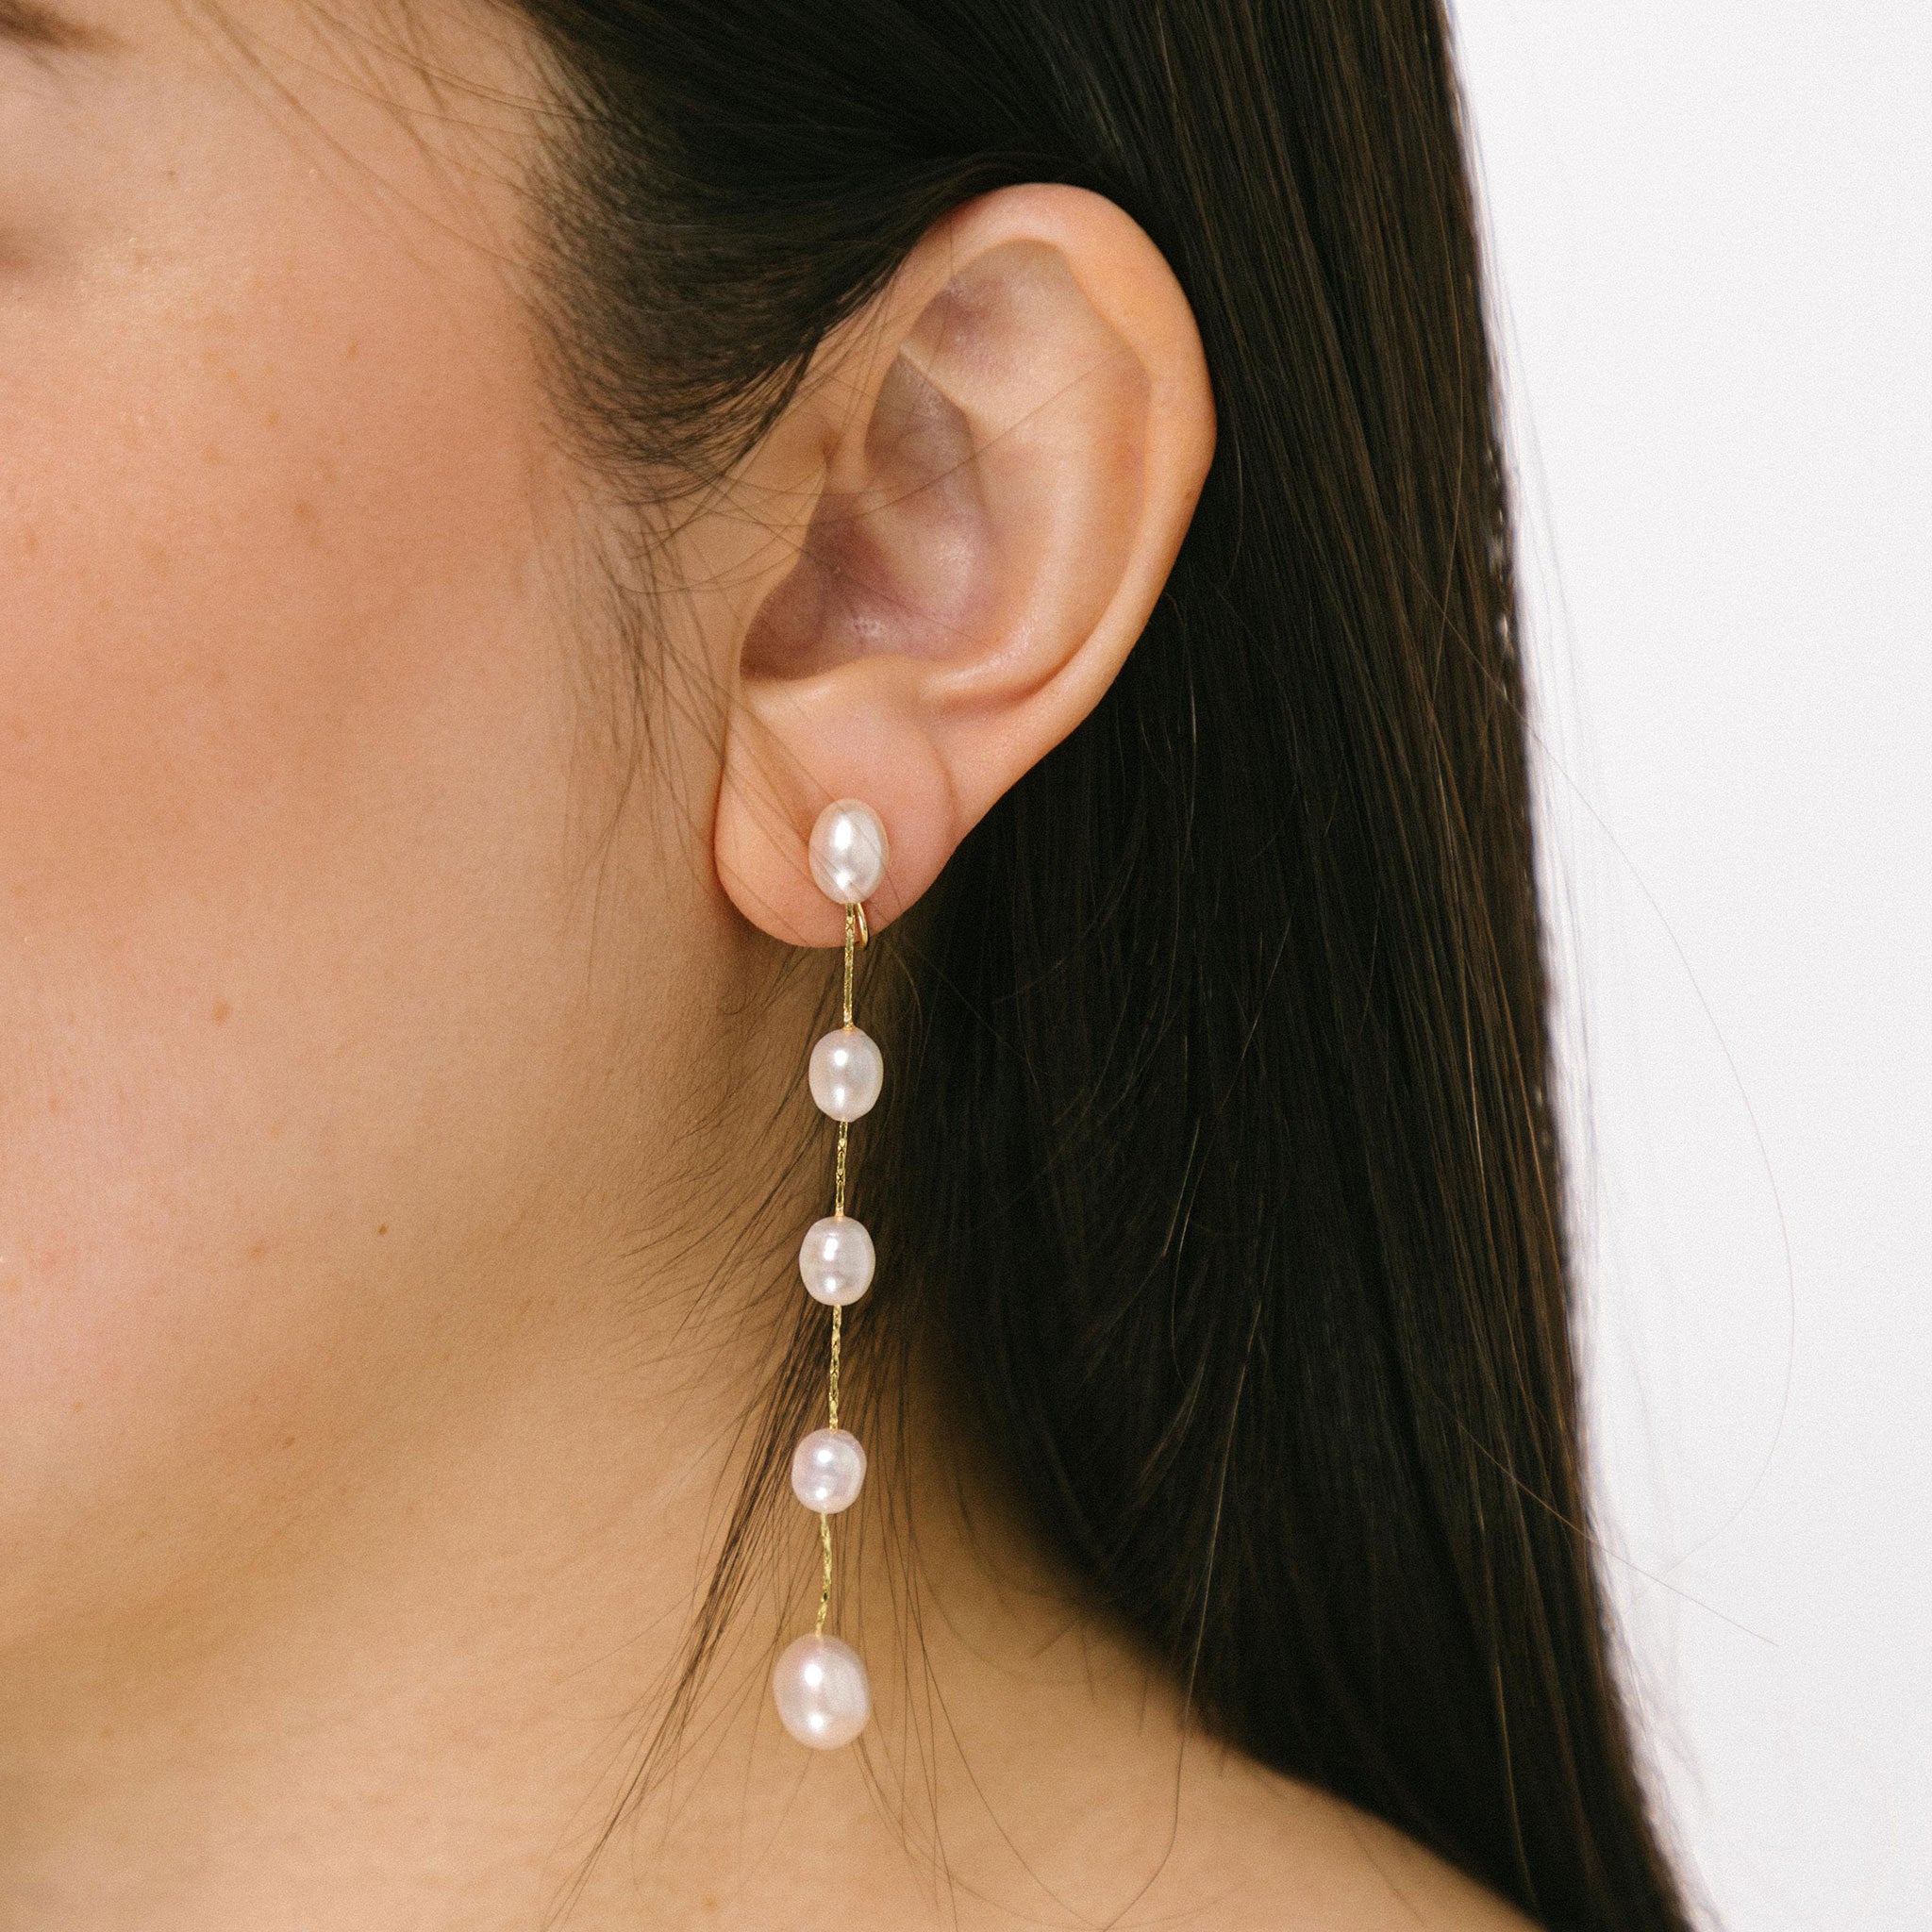 A model wearing the Lune Pearl Clip-On Earrings in Gold feature a unique, secure mosquito coil clasp. They are ideal for all ear types, from thick and large ears to sensitive and small. With medium hold strength, the earrings can be comfortably worn up to 24 hours and easily adjusted. Crafted with freshwater pearls, each pair may display natural variations in size and color. Materials include freshwater pearl and 18K gold-plated stainless steel.